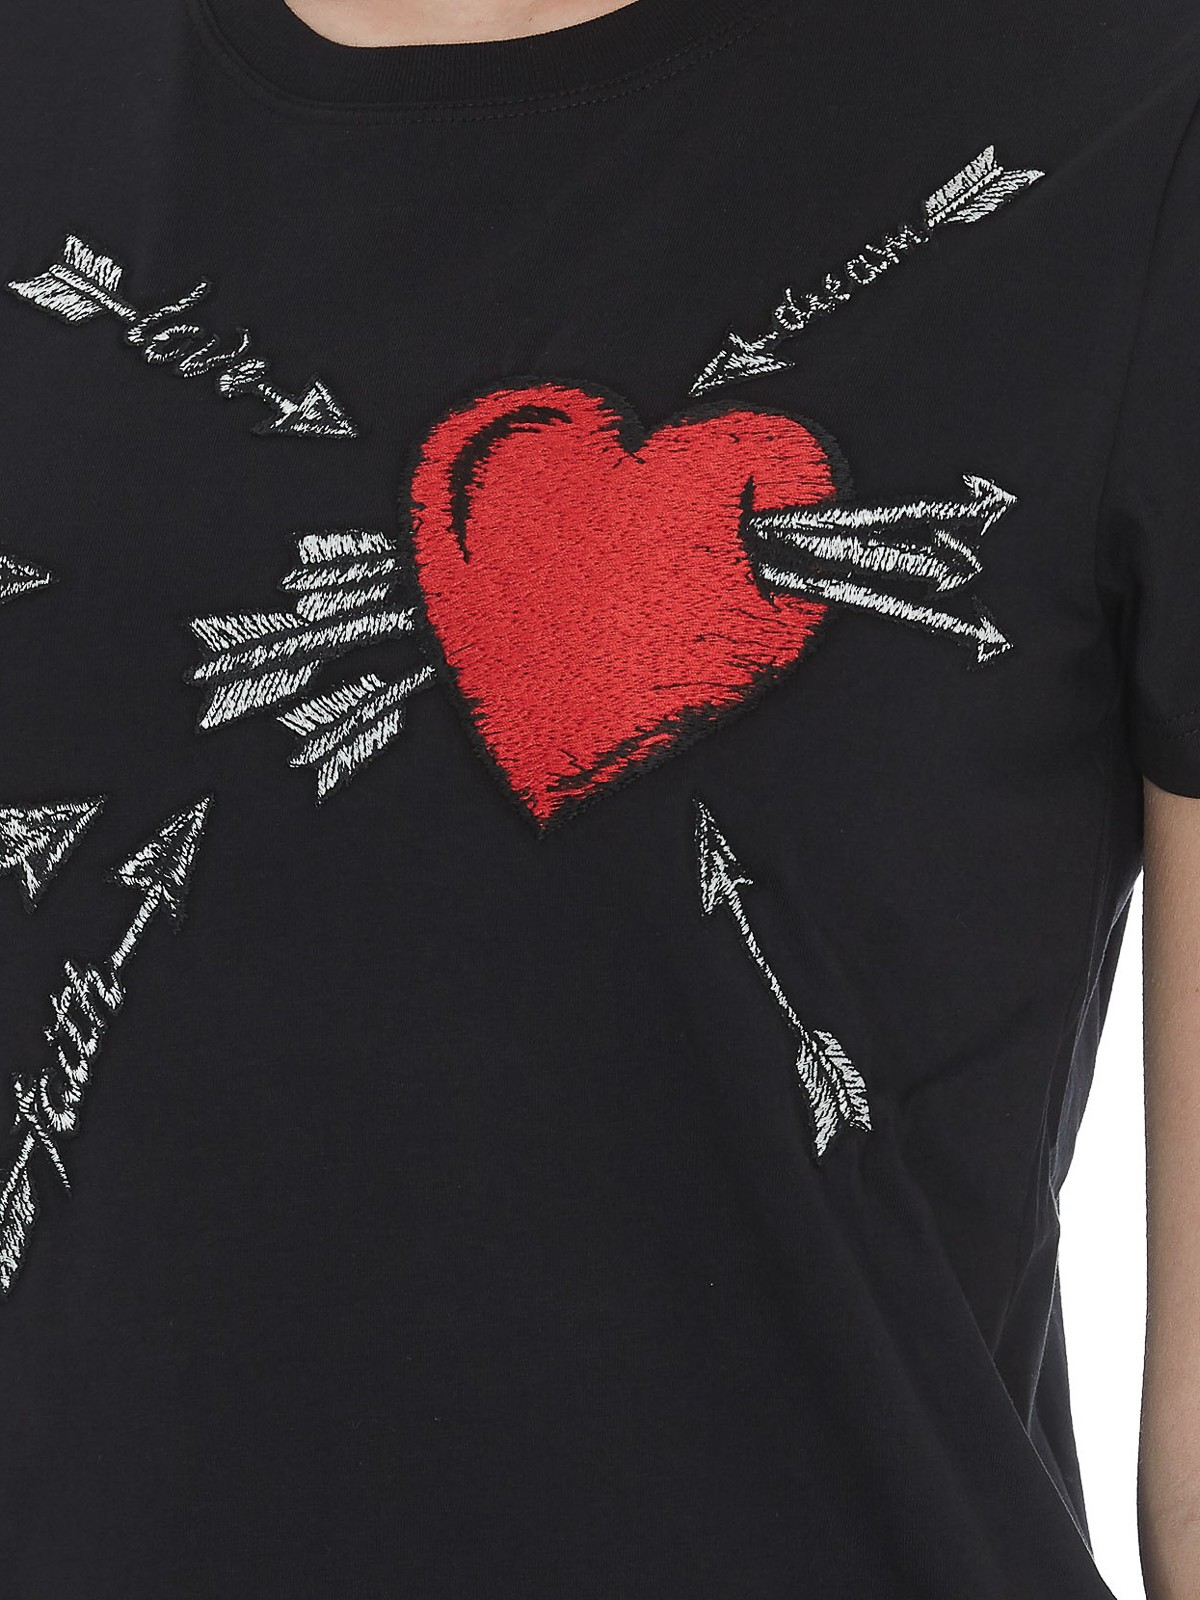 black t shirt with red heart